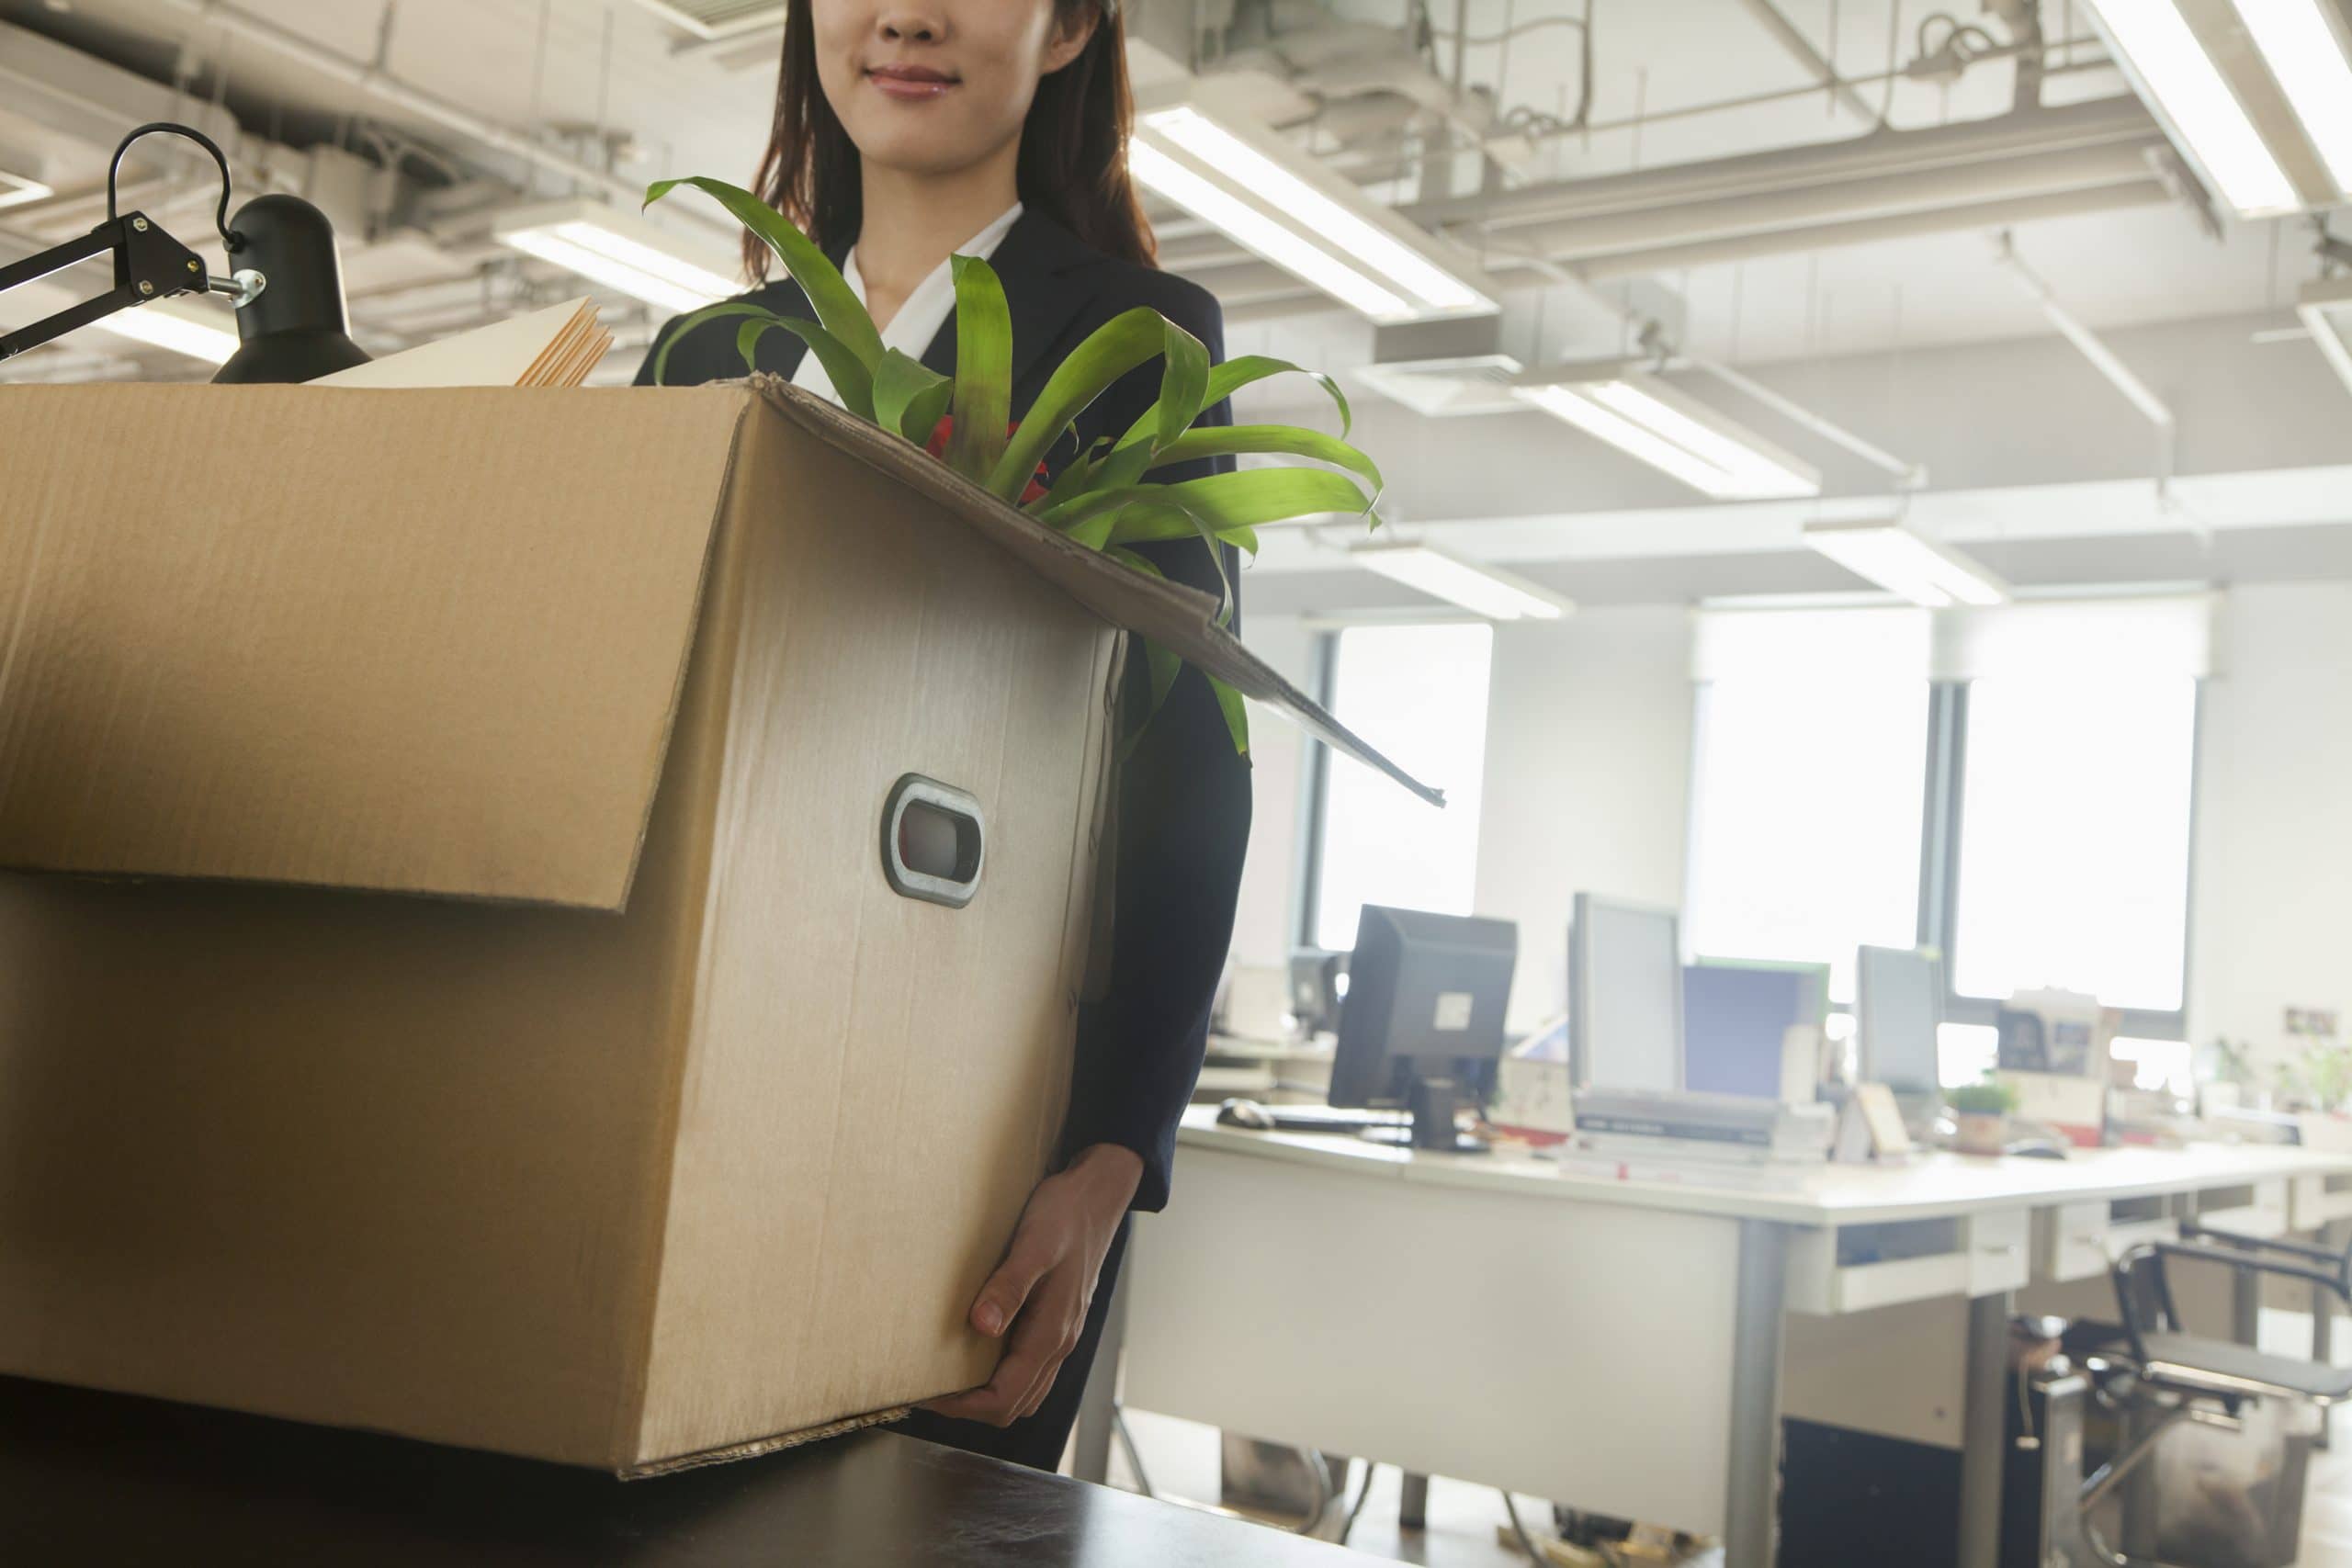 woman packing a box in an office